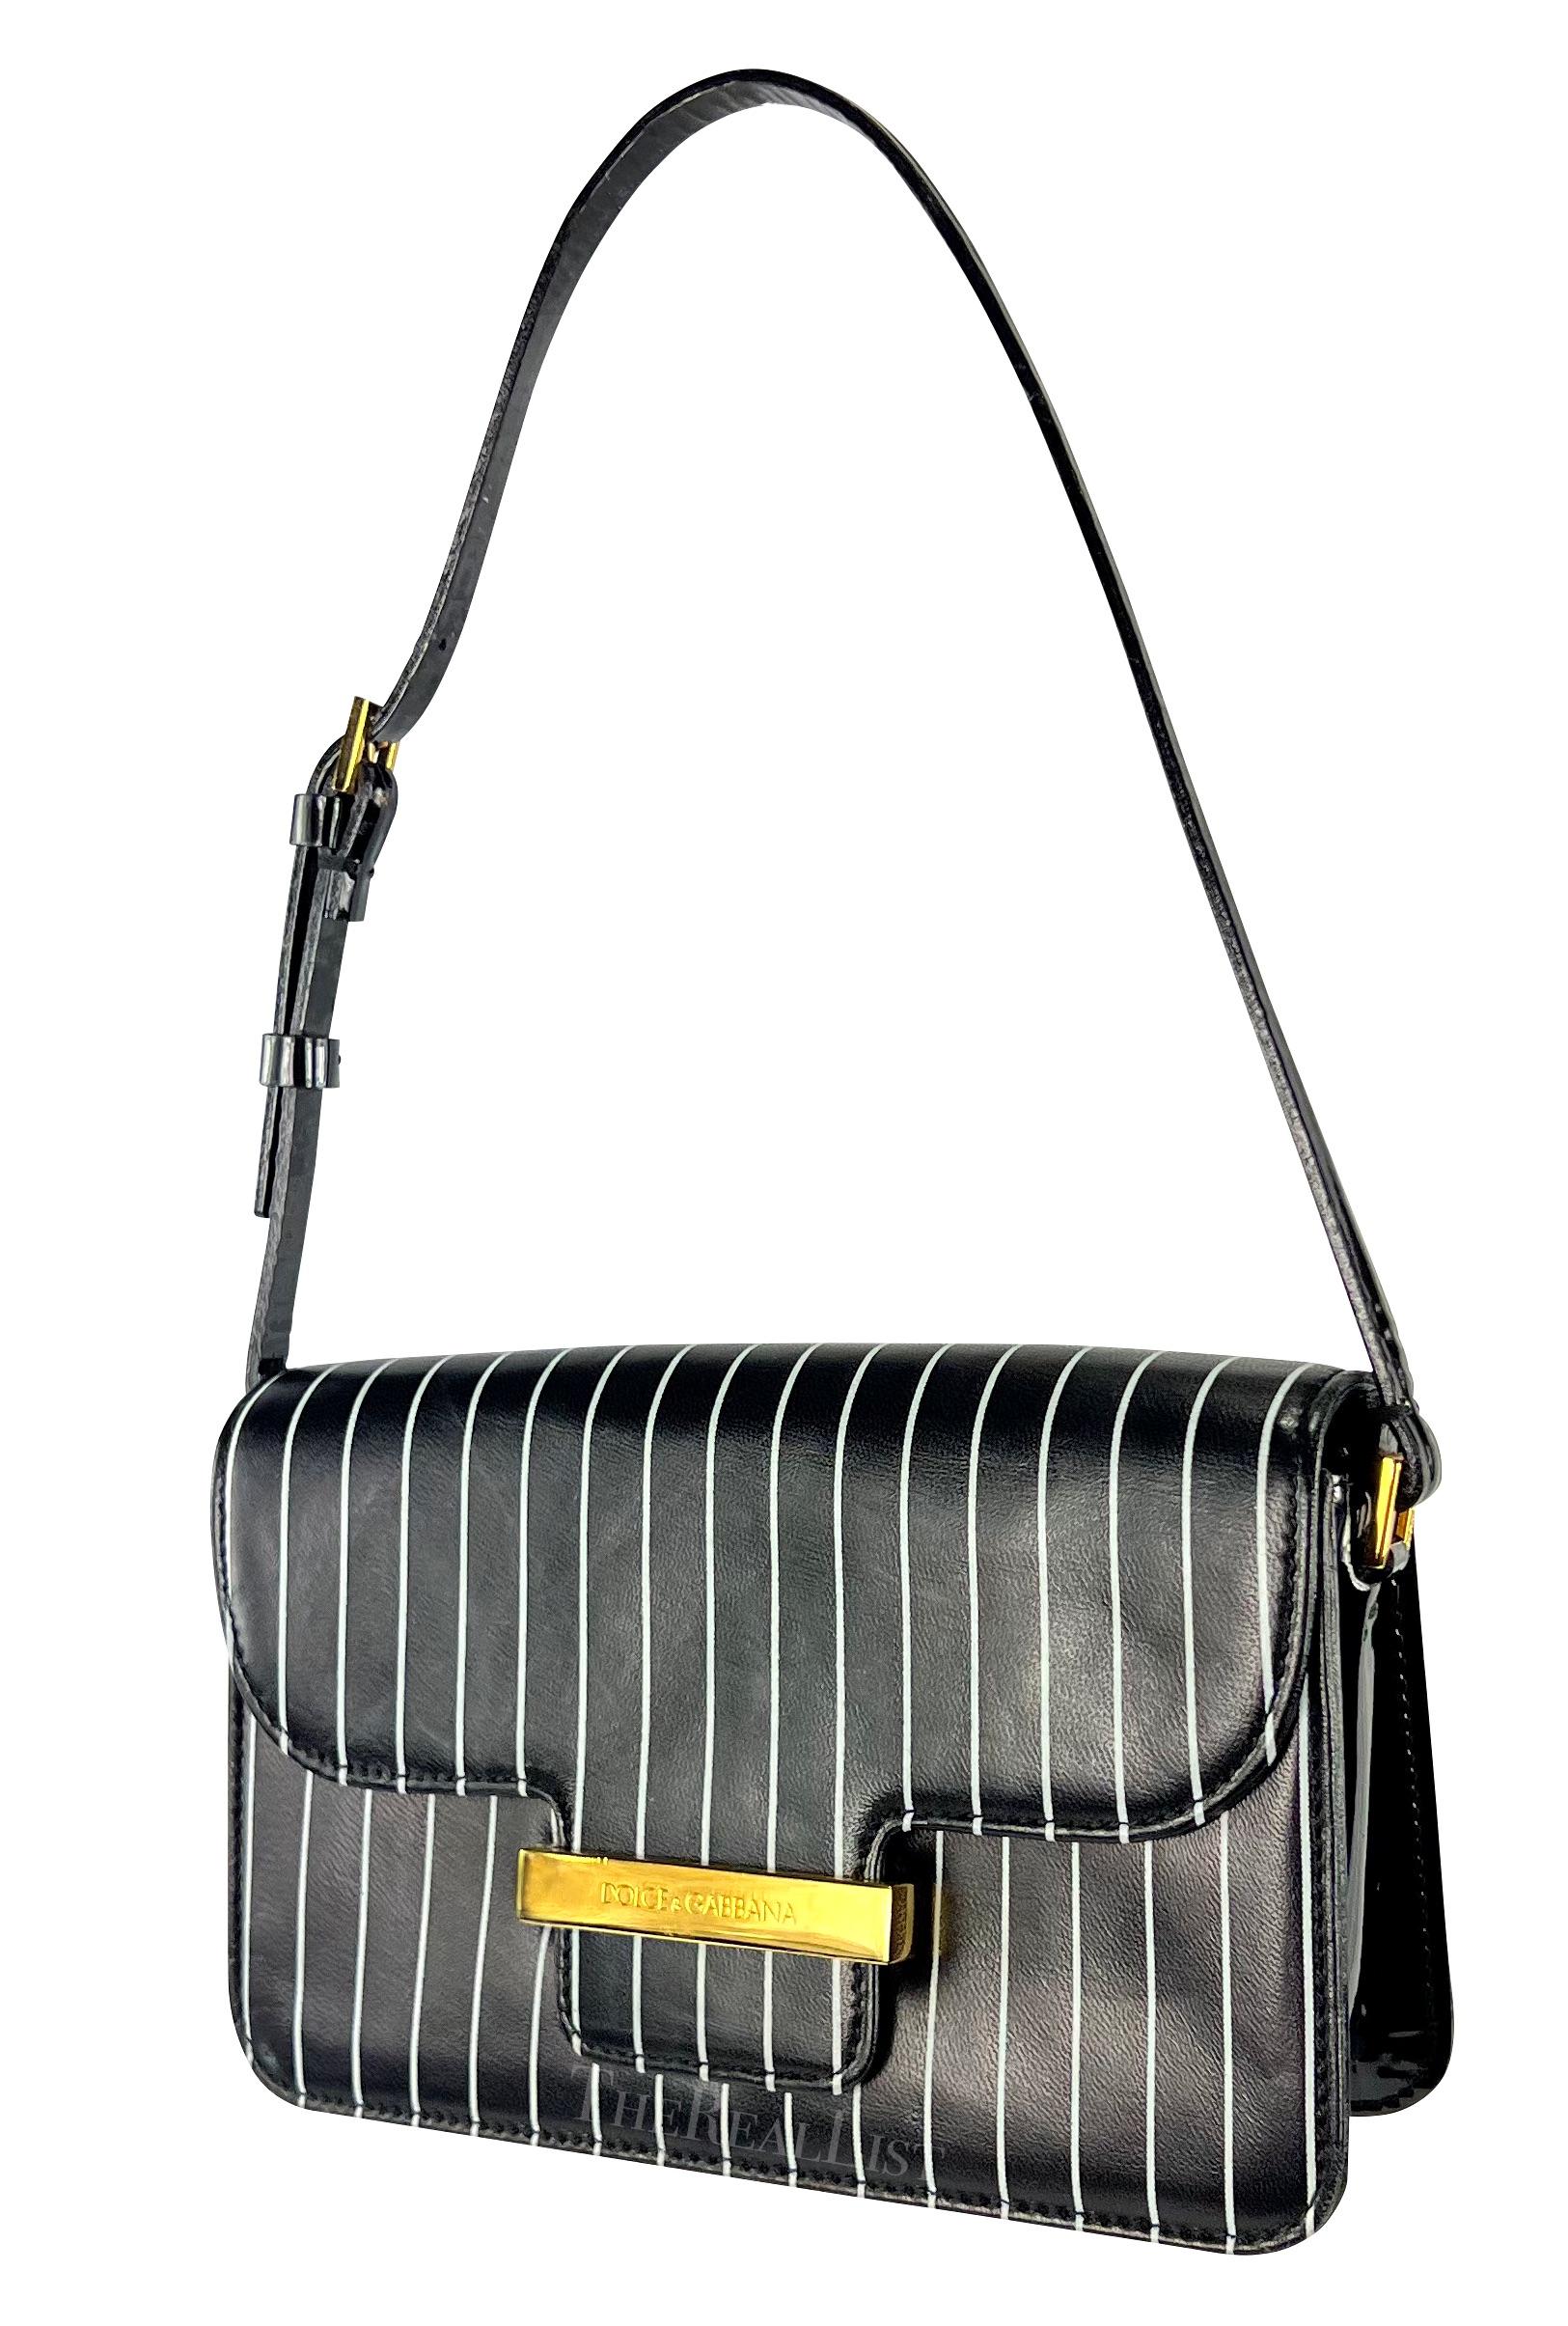 S/S 2001 Dolce & Gabbana Runway Black Pinstripe Leather Patent Mini Shoulder Bag In Excellent Condition For Sale In West Hollywood, CA